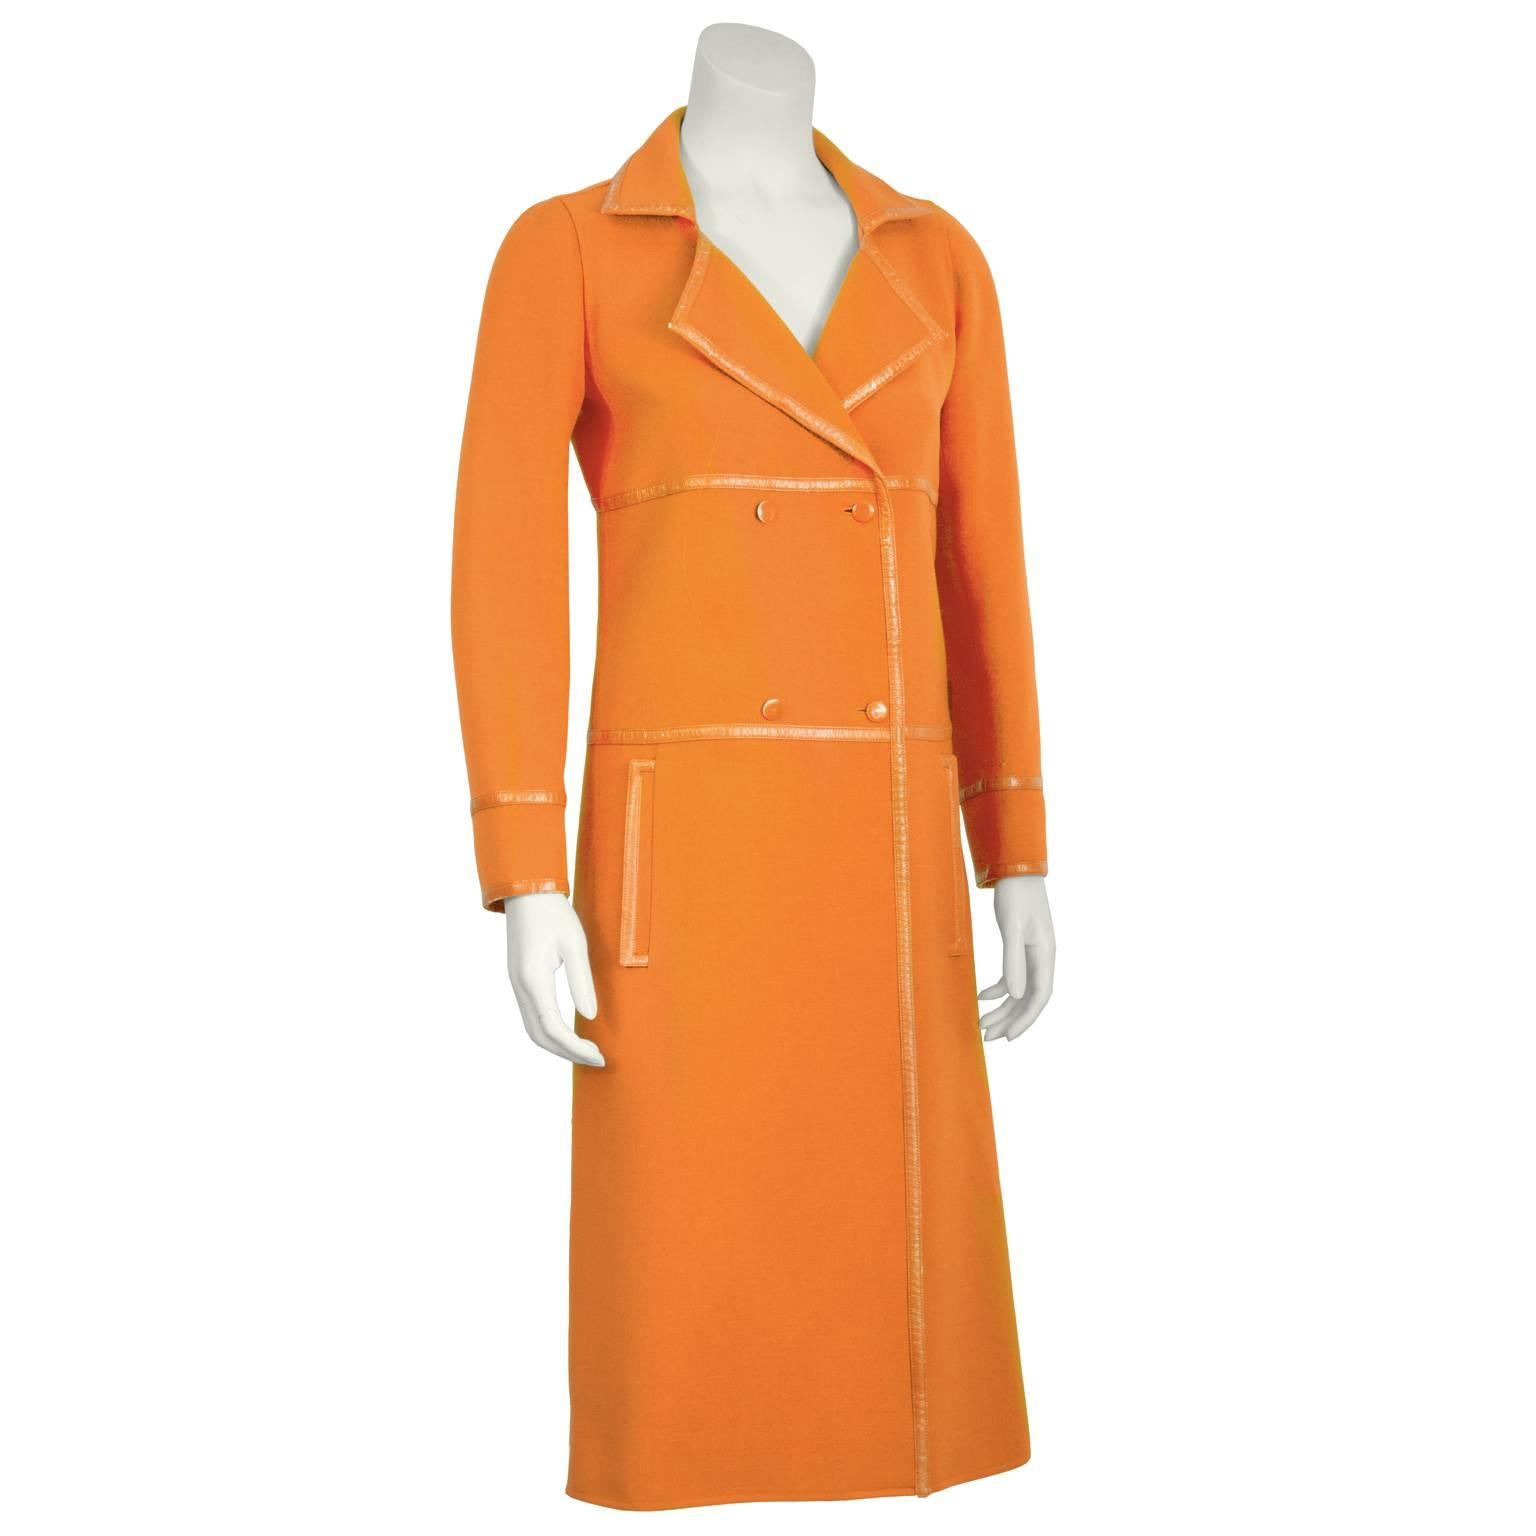 Orange Courreges mod coat from the 1960's features notched lapels, double breasted closure, vertical flap pockets at the hips, and a triple vented panel detailing at the back. Tonal vinyl trim throughout. Some minor flaking to the vinyl